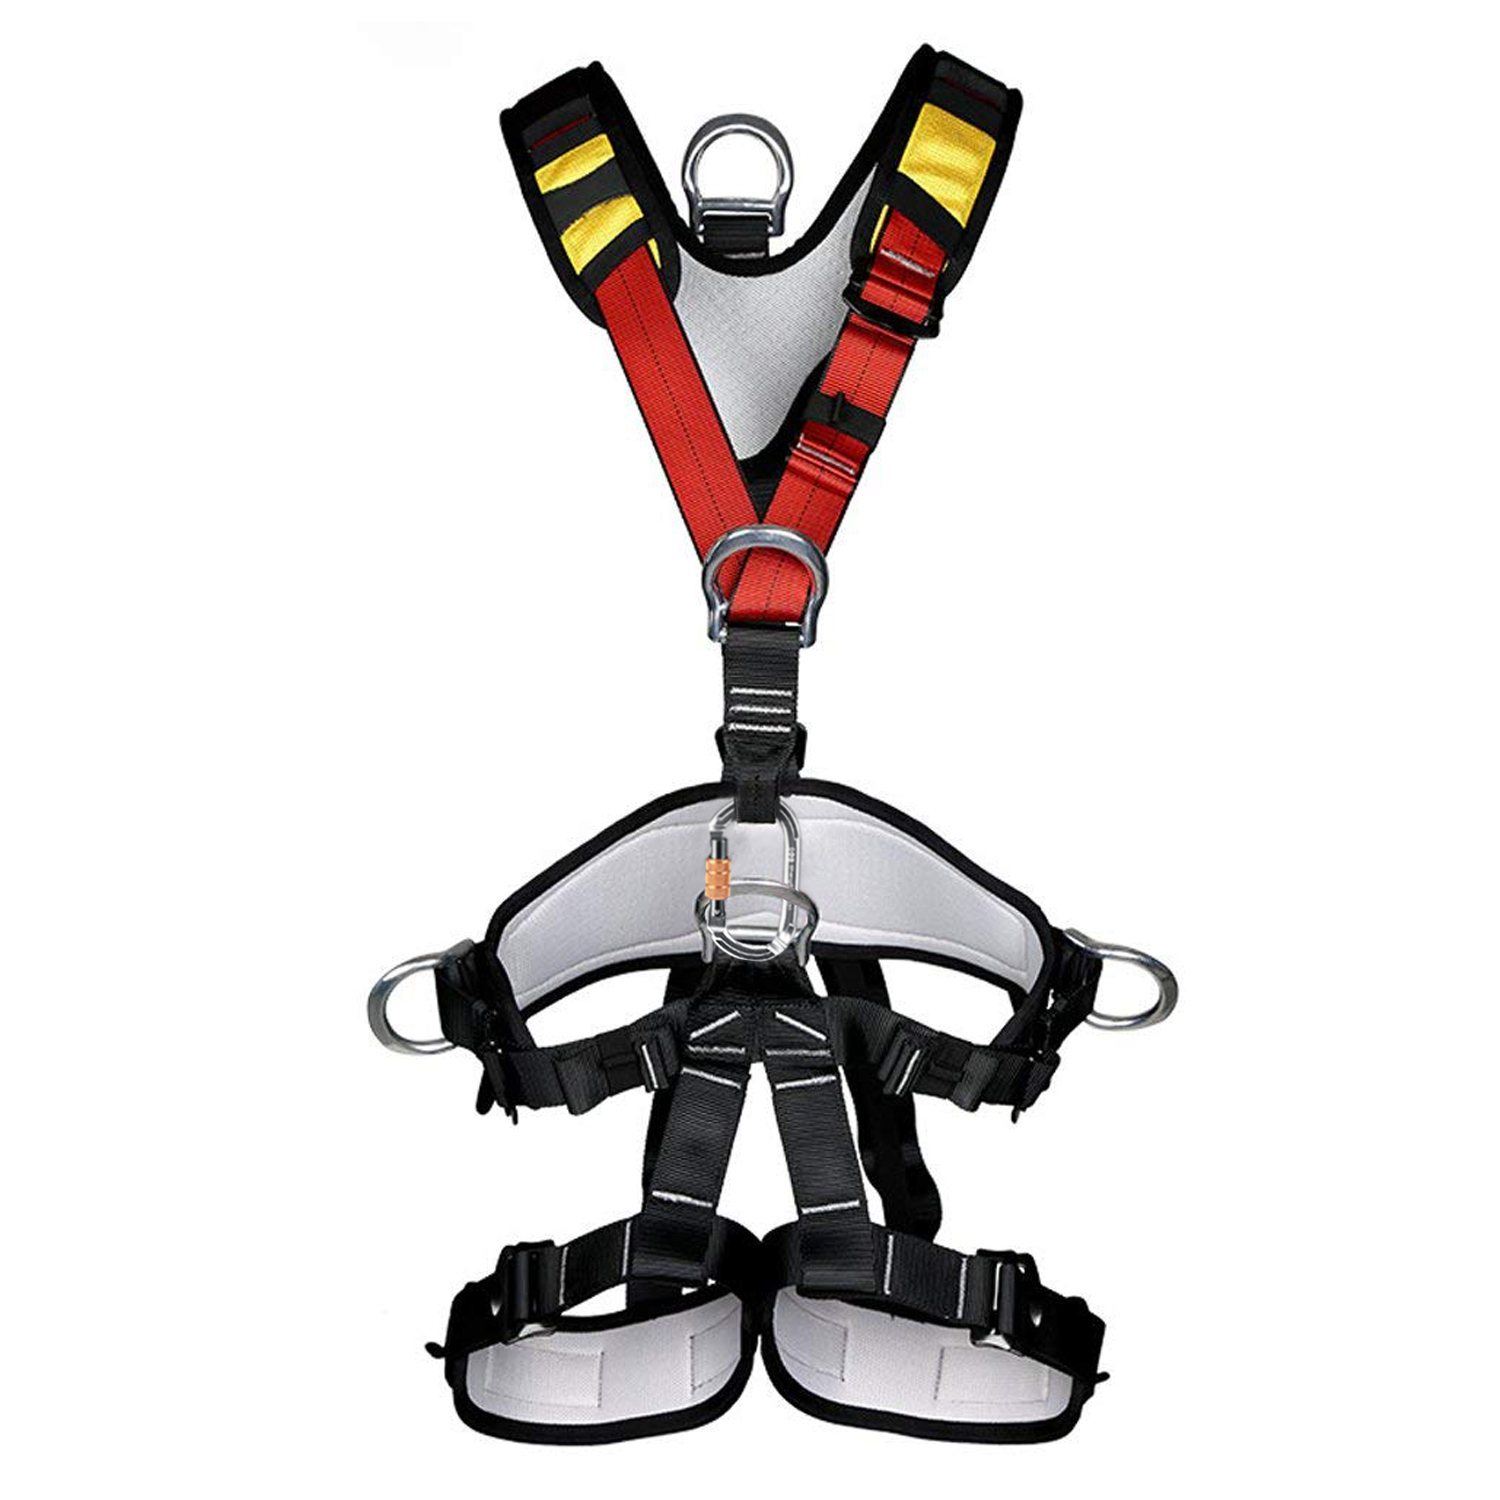 Wildken Body Belt with Waist Pad and Side D-Rings Personal Protective Equipment Safety Climbing Harness